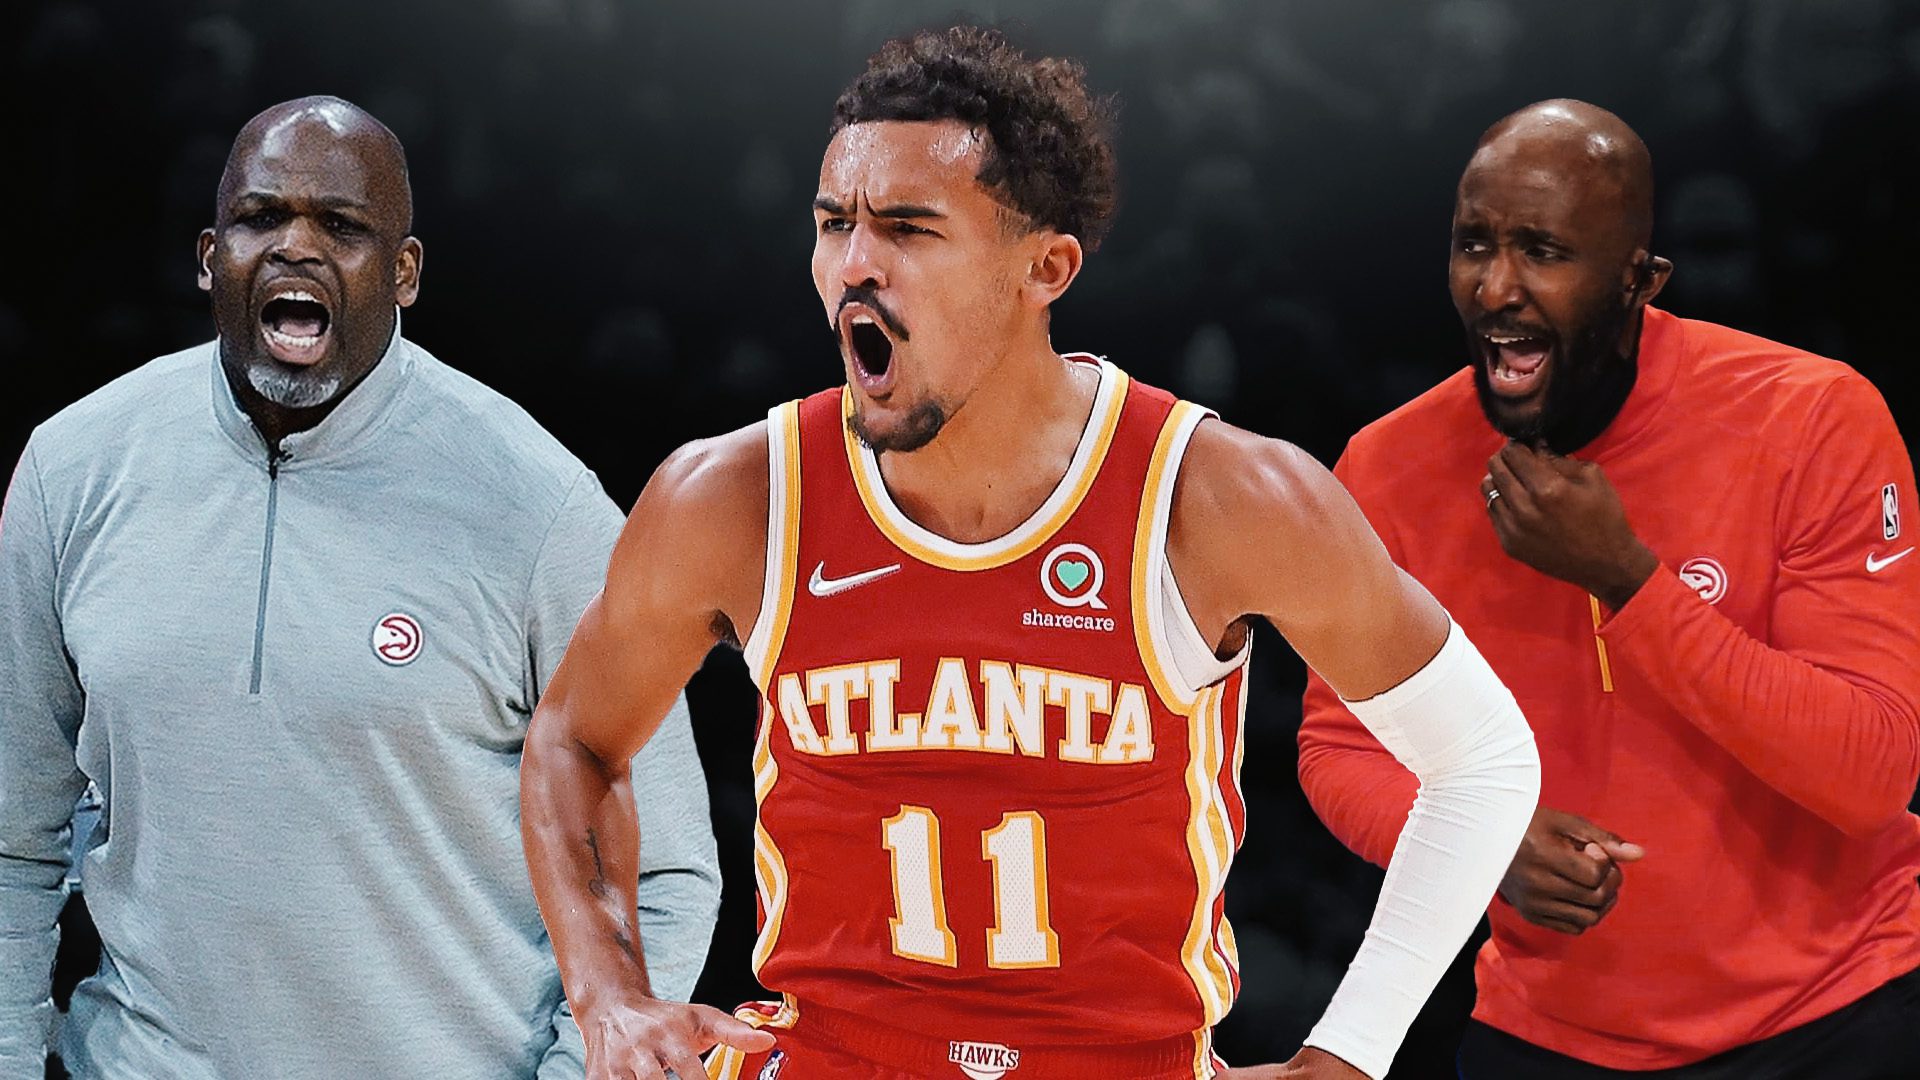 Trae Young’s Response to Being Called a ‘Coach Killer’